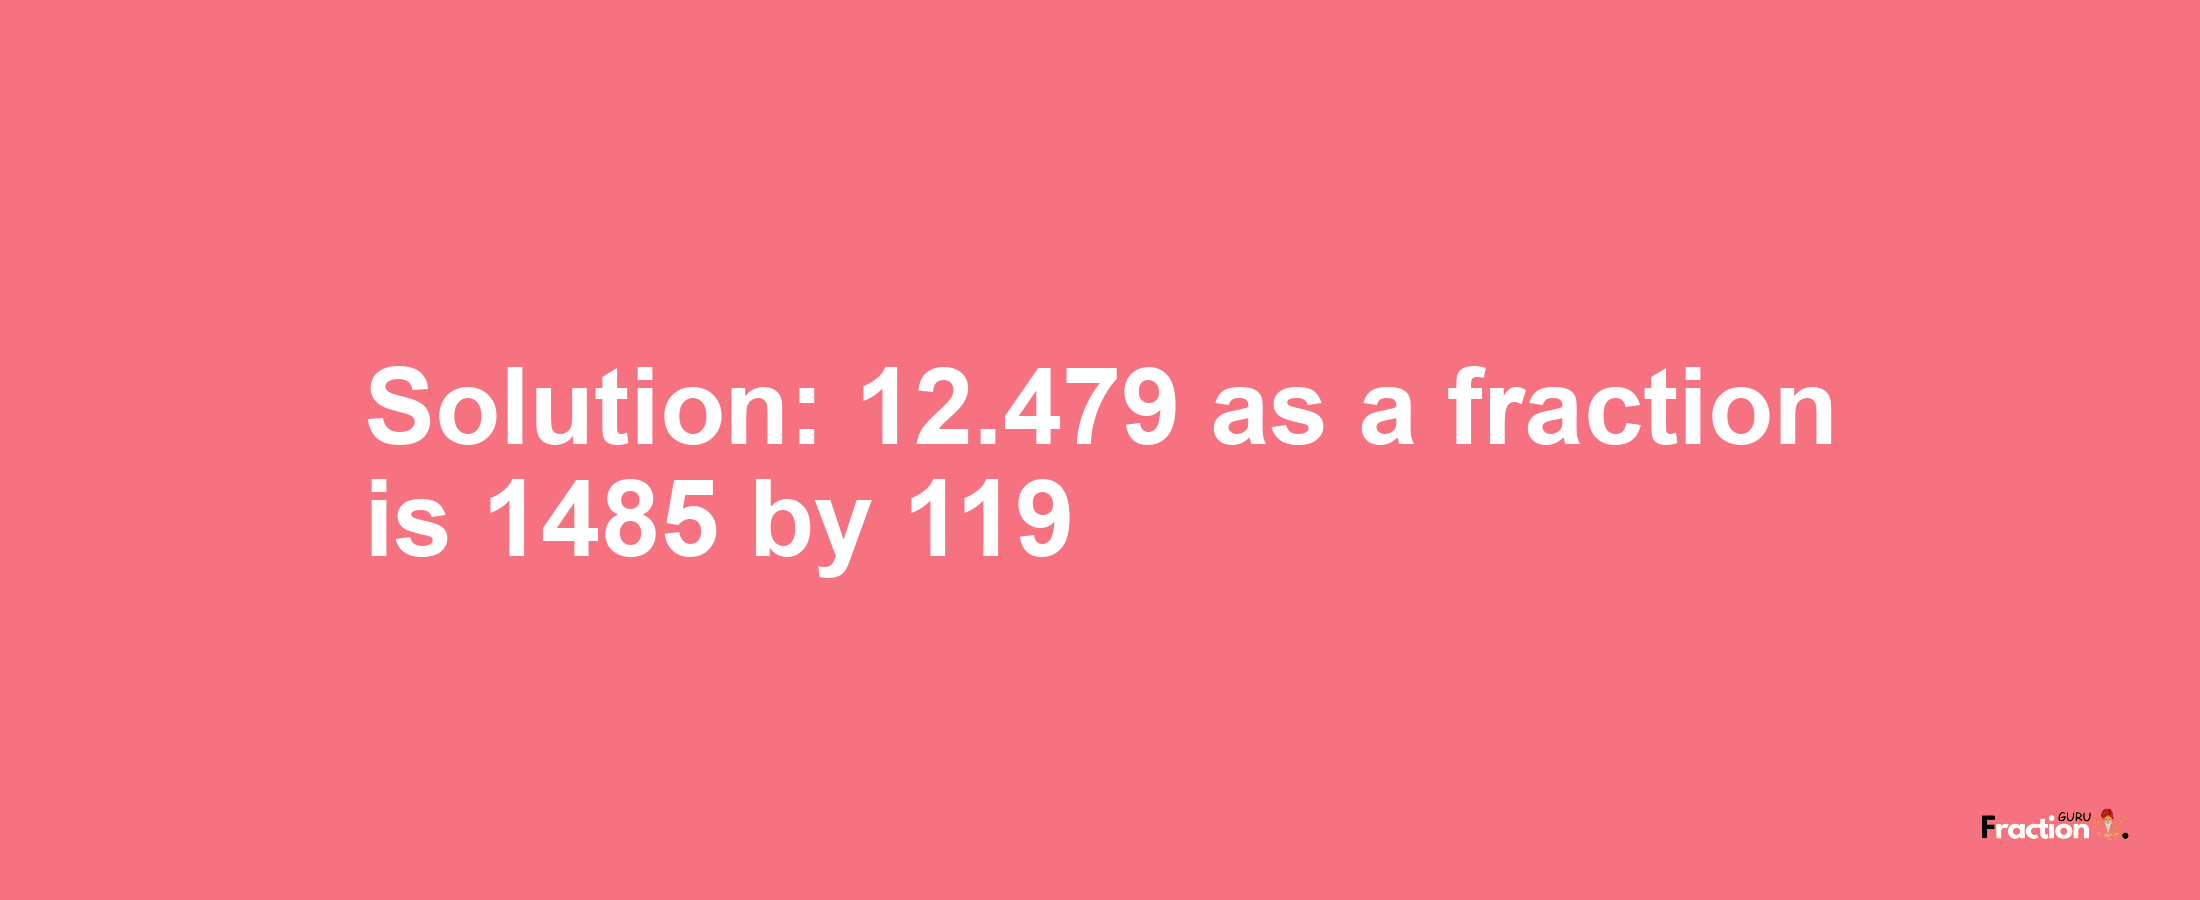 Solution:12.479 as a fraction is 1485/119